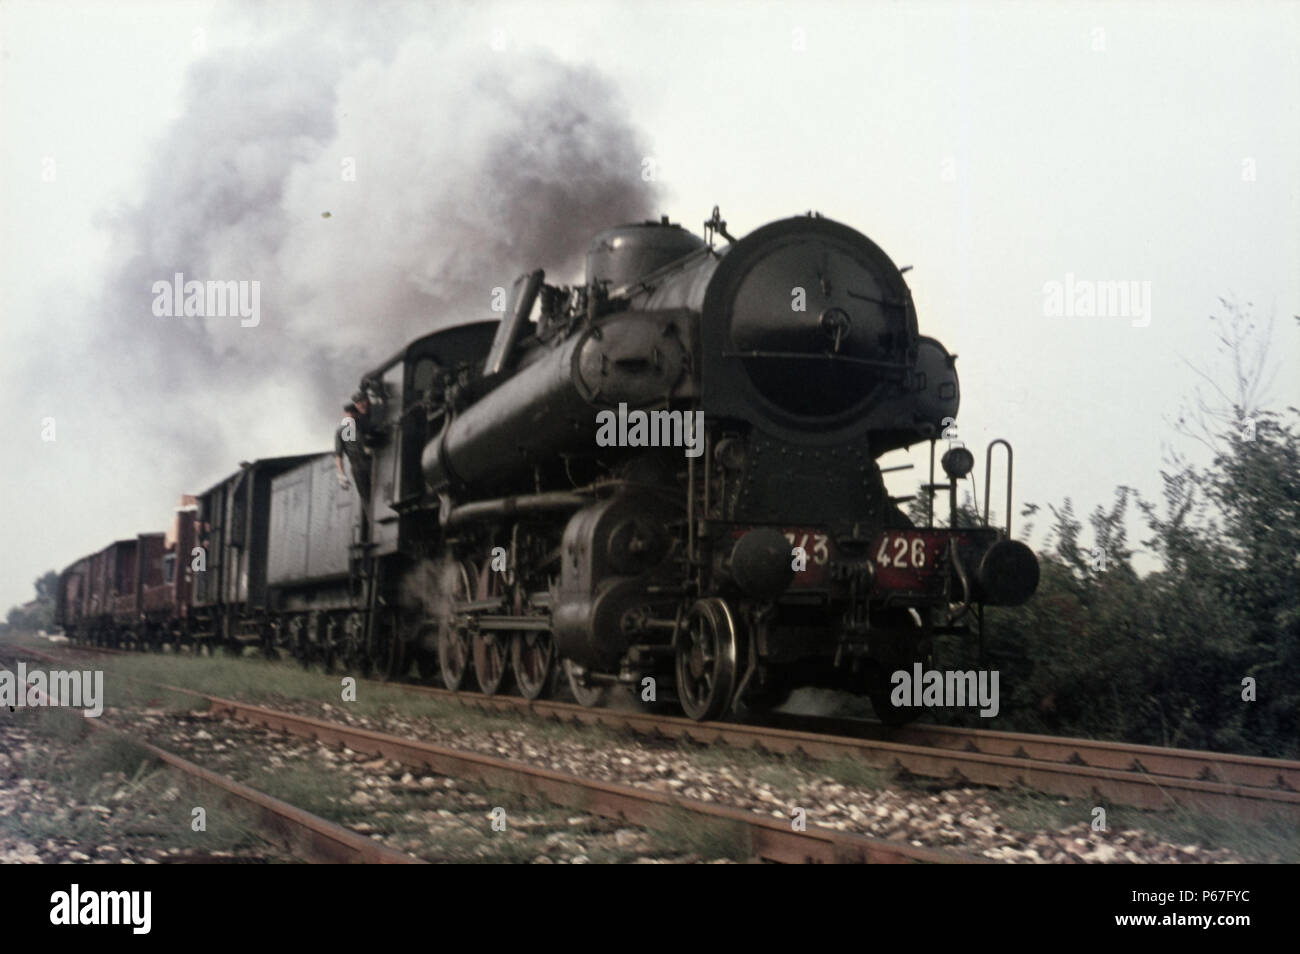 Franco Crosti boilered 743 Class No. 426 ends its days in Northern Italy in 1976. Stock Photo